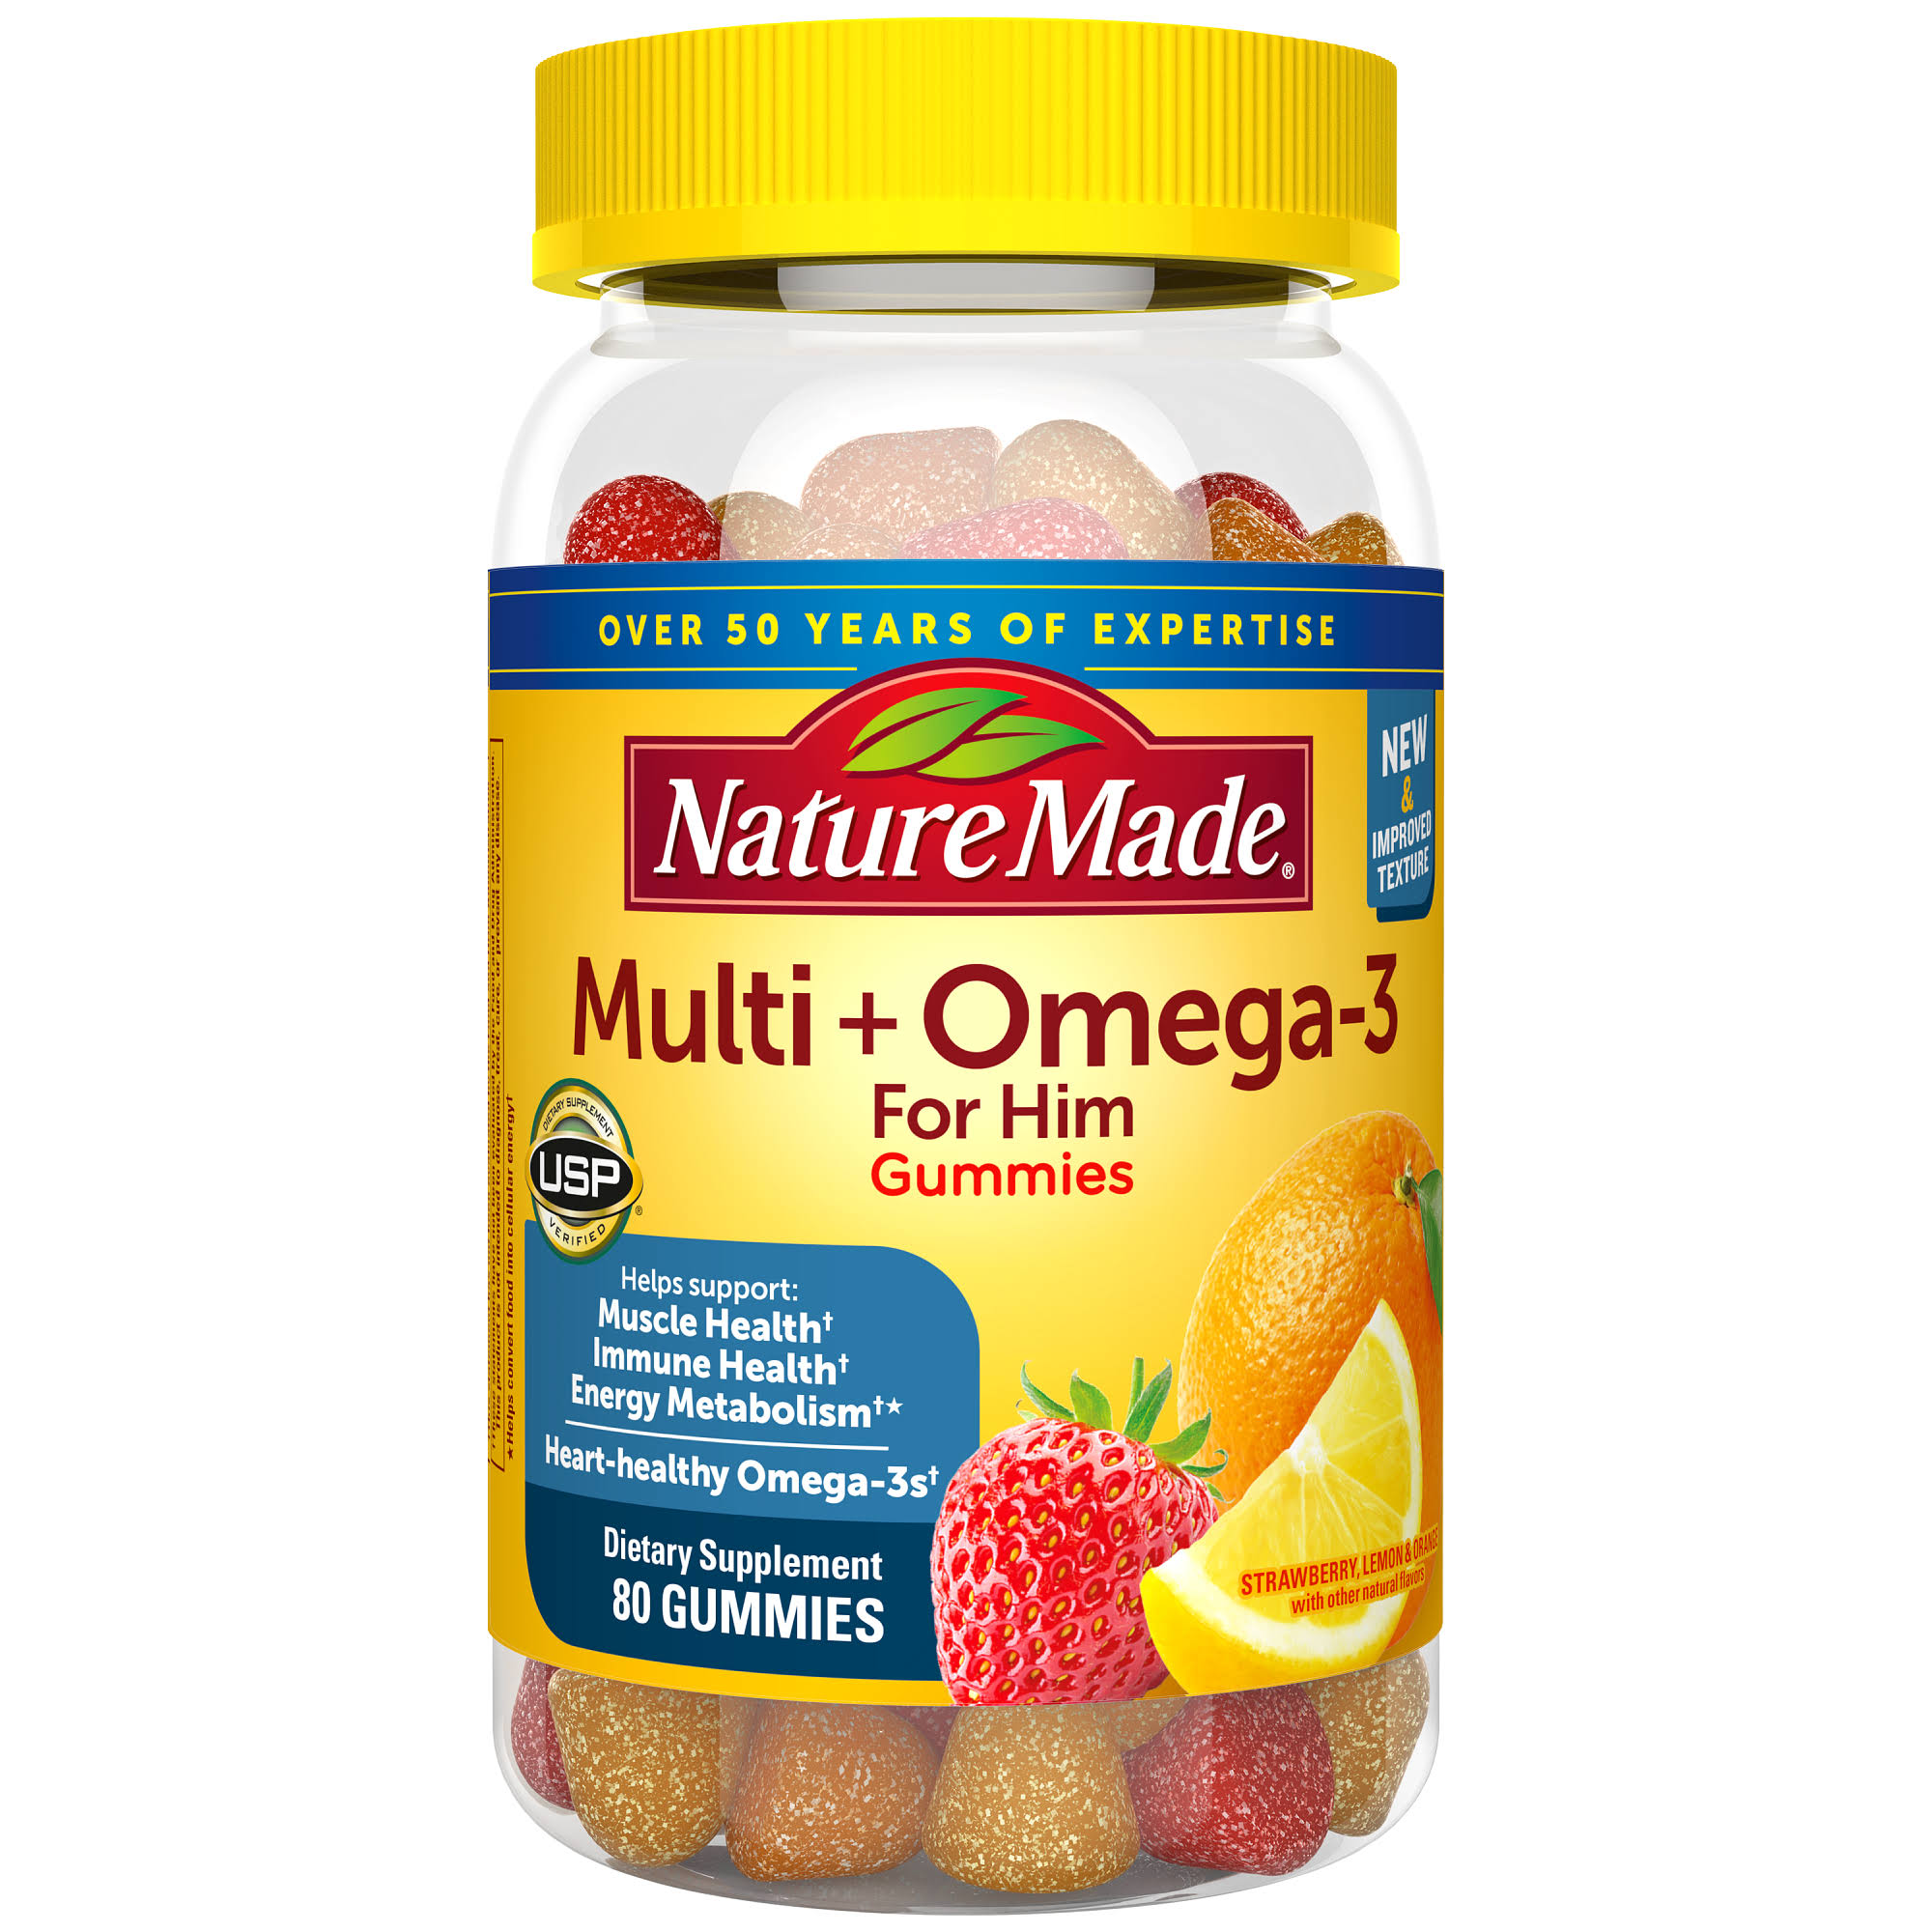 Nature Made Multi for Him + Omega-3 Supplement - 80 Gummies